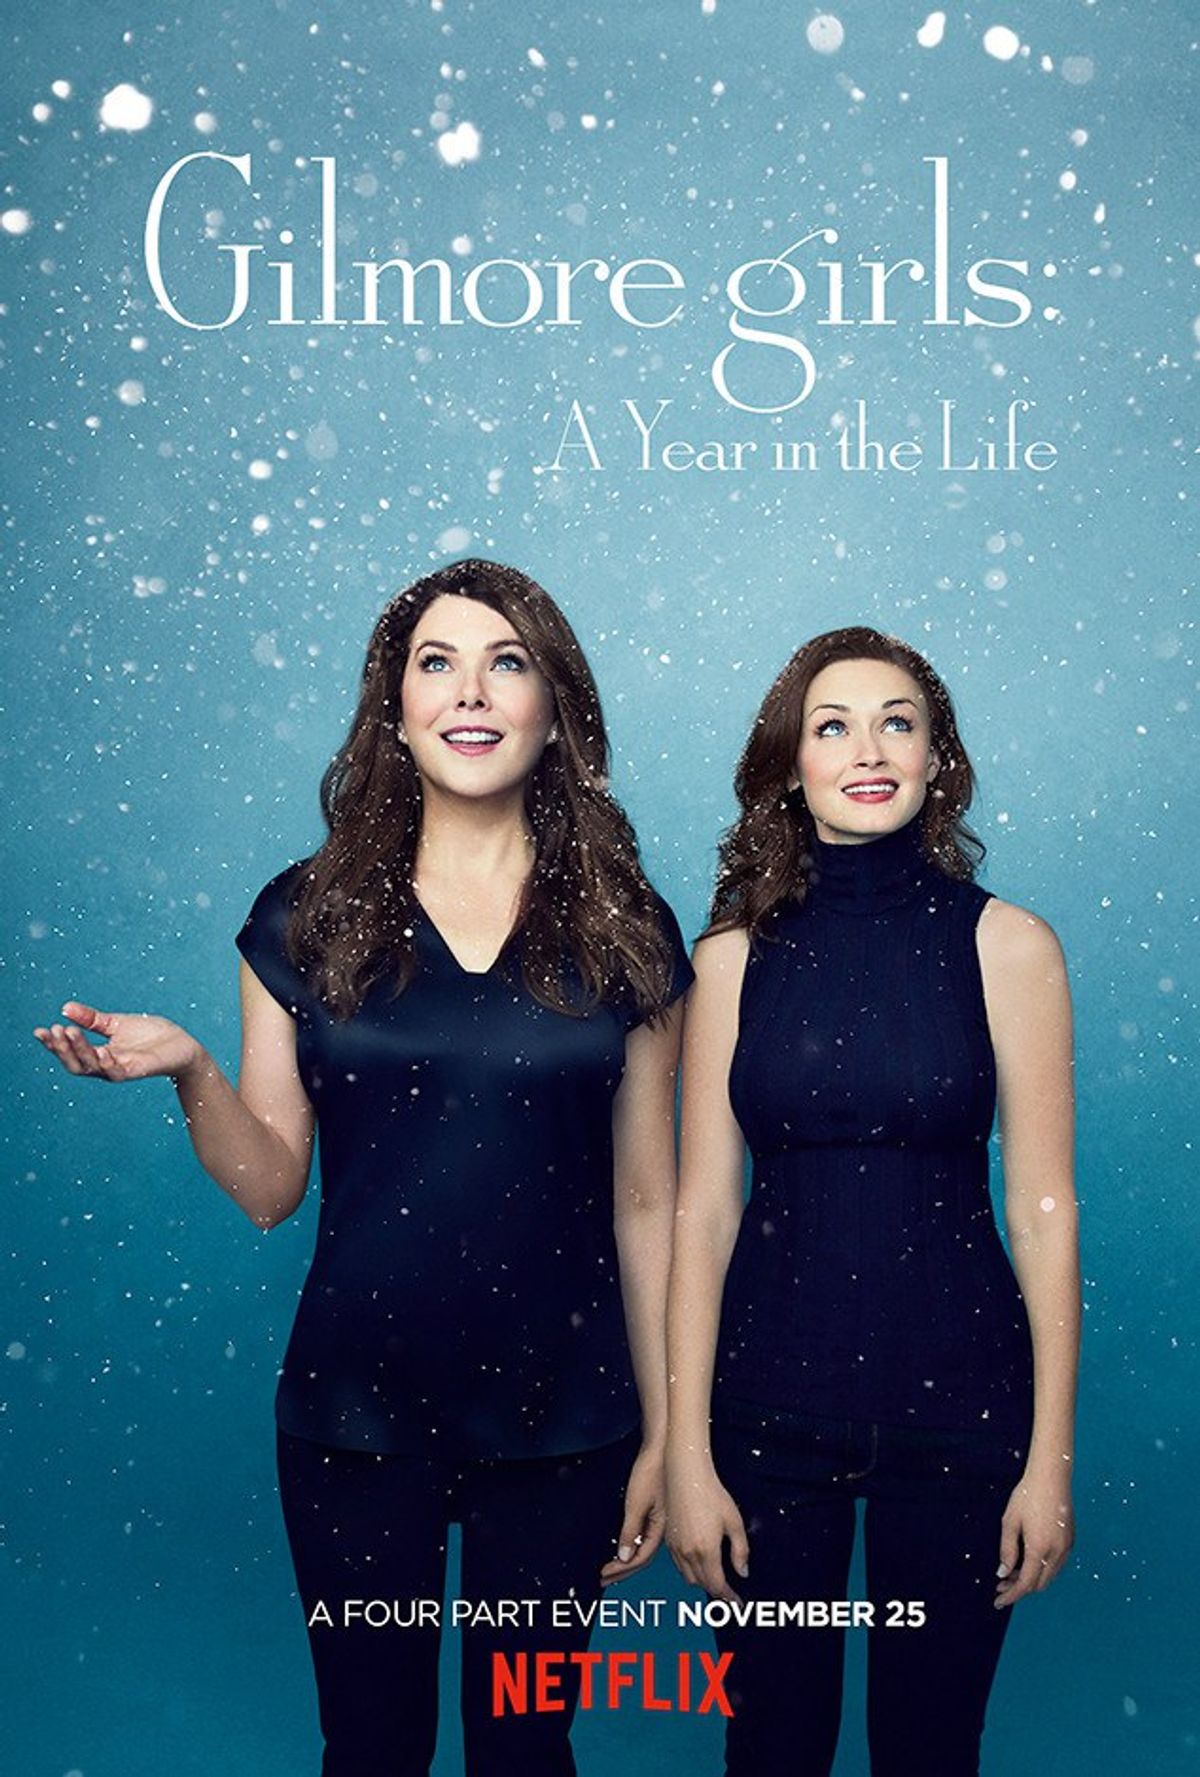 Gilmore Girls: A Year in the Life Review